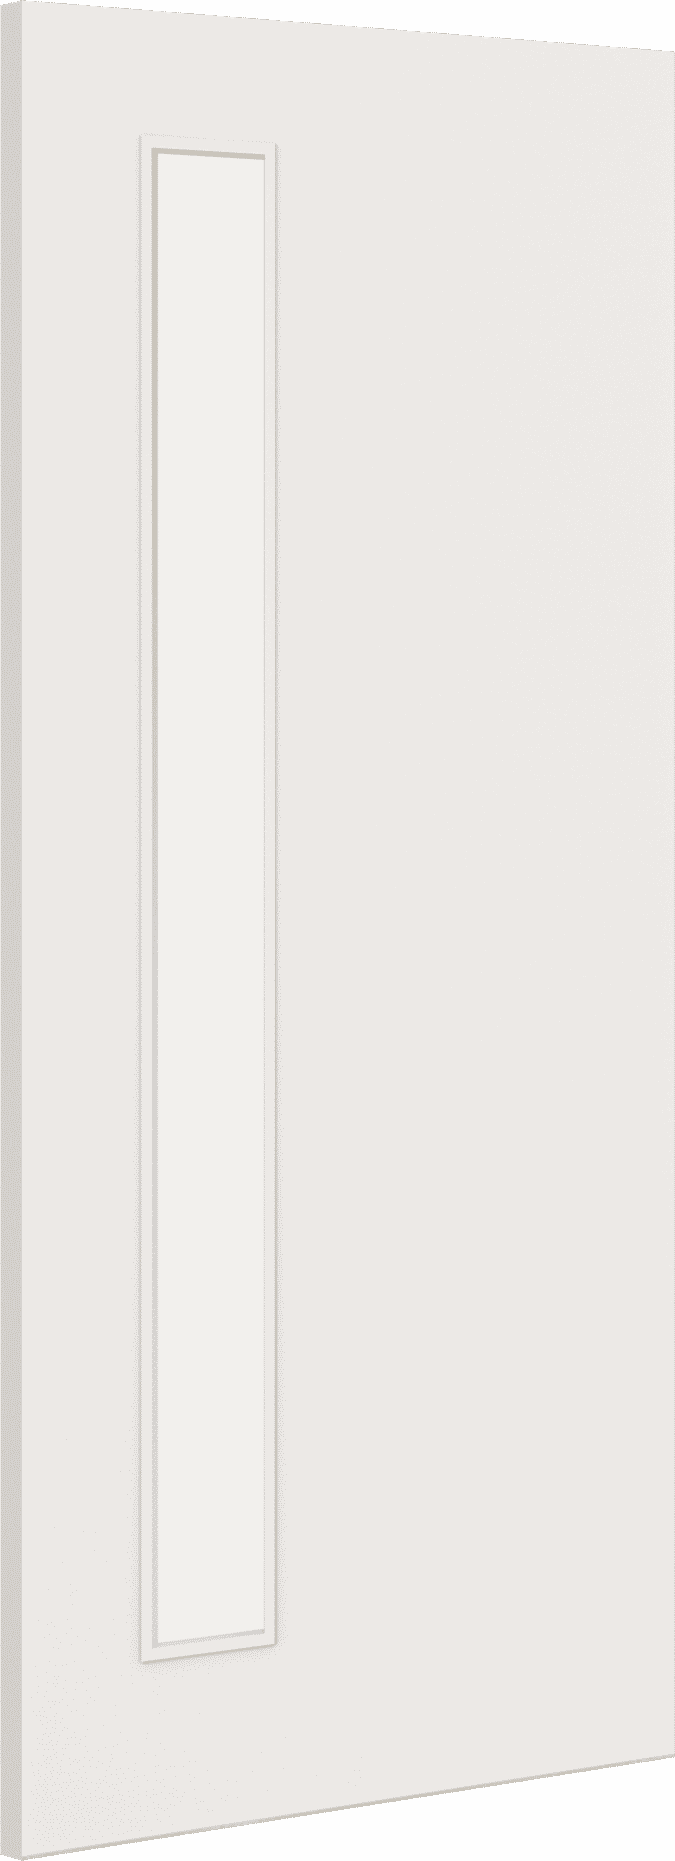 1981mm x 762mm x 44mm (30") Architectural Paint Grade White 06 Frosted Glazed Fire Door Blank